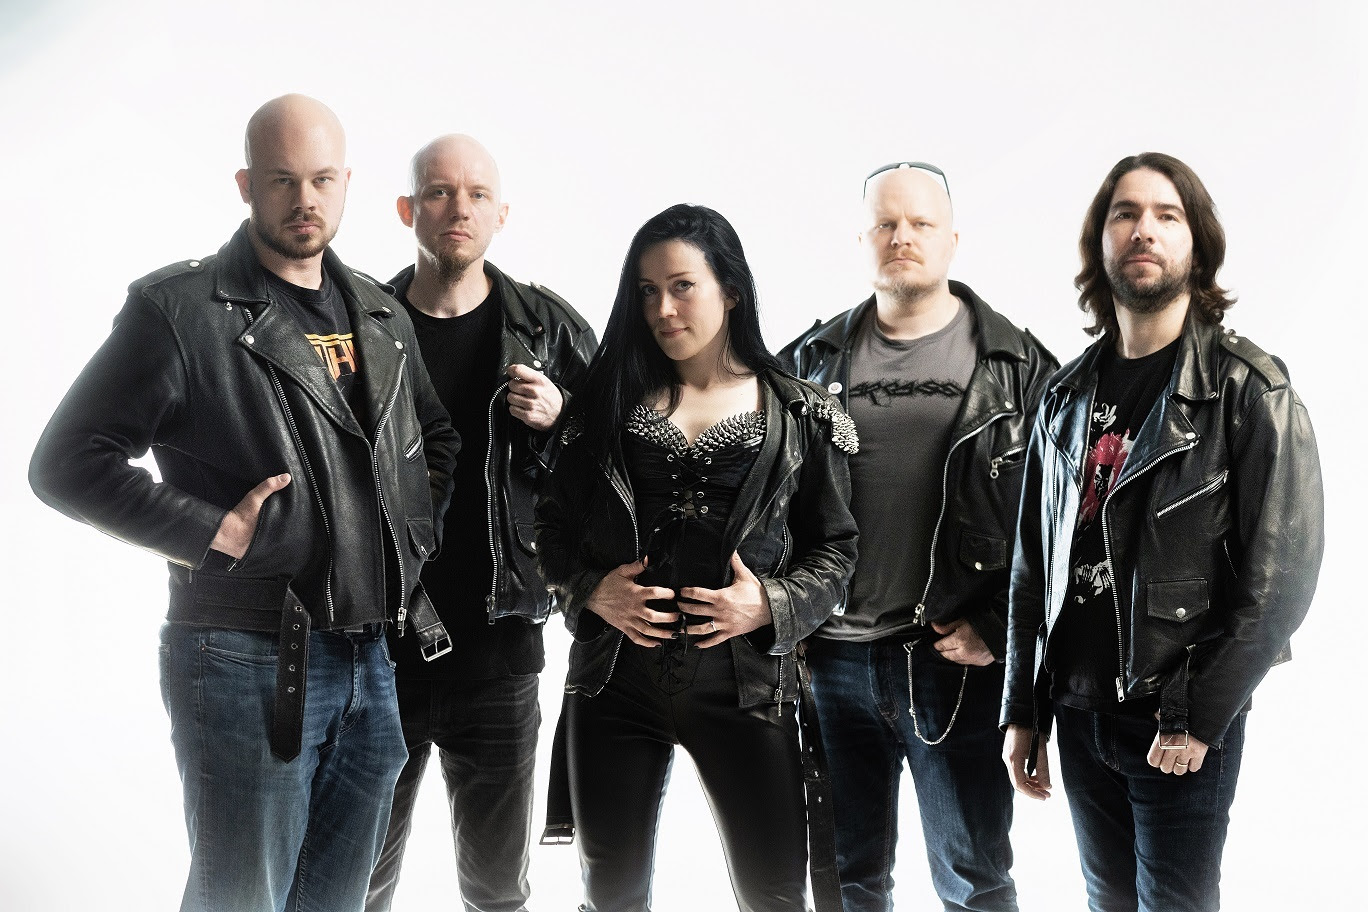 Finnish Heavy Metal act RATBREED release music video for new single “Master Of Deception”.